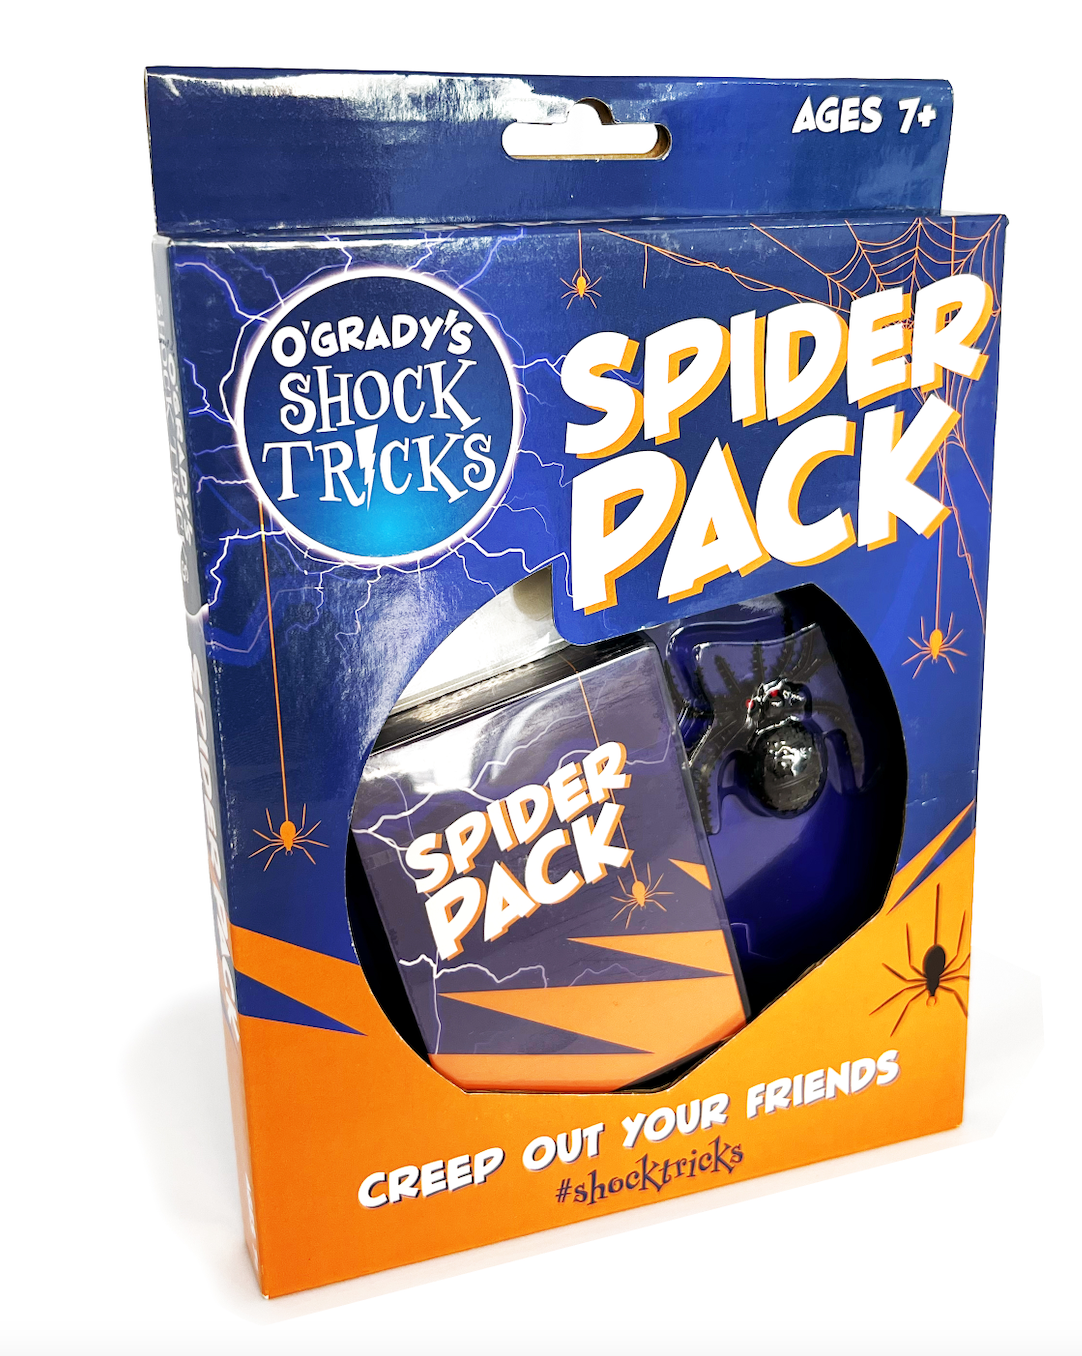 Ogrady's spider pack out now